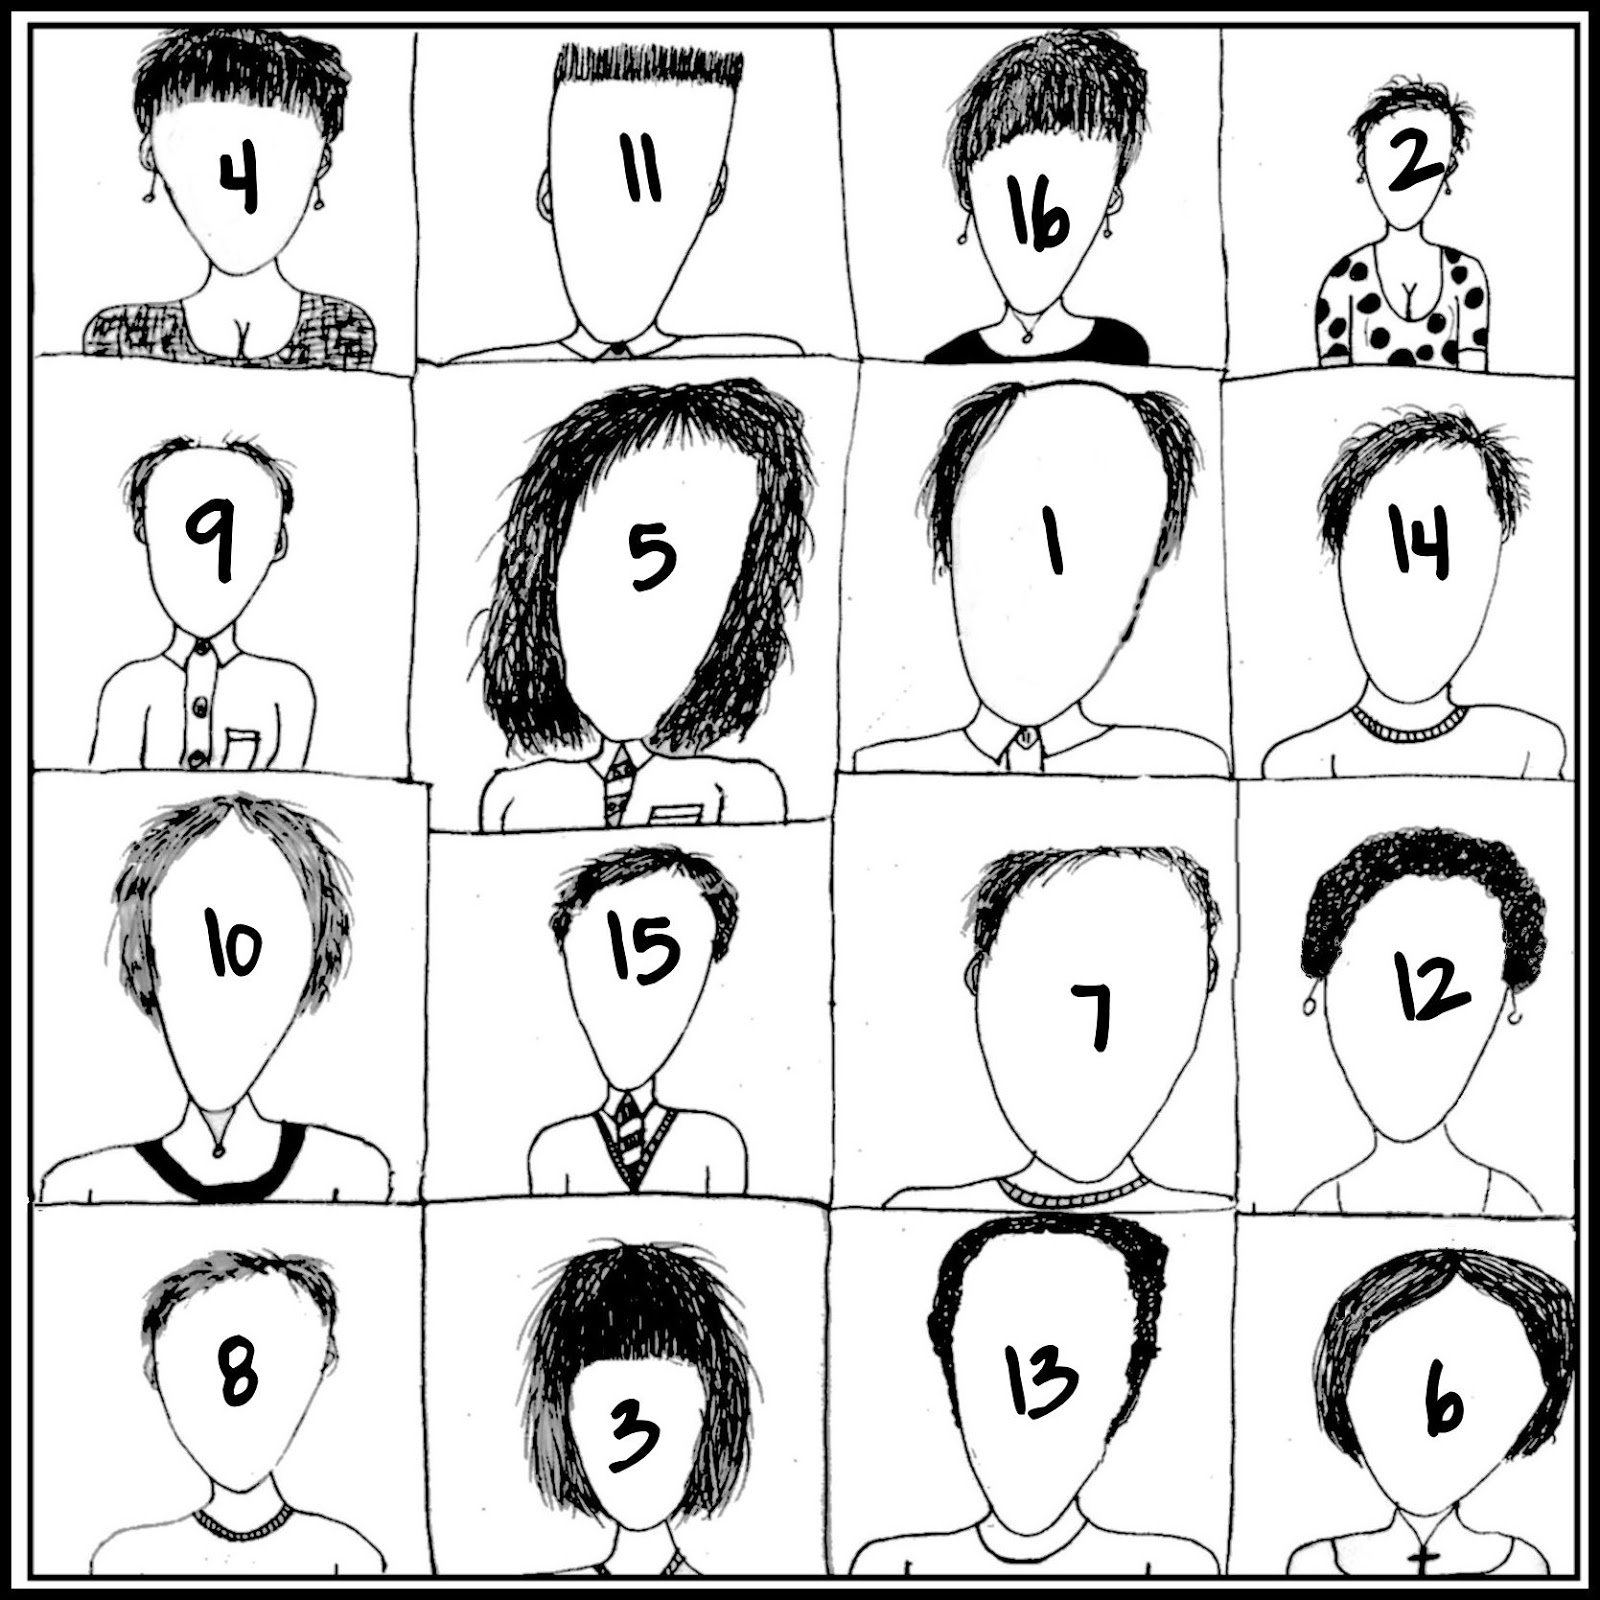 all-this-is-that-drawing-faces-1183